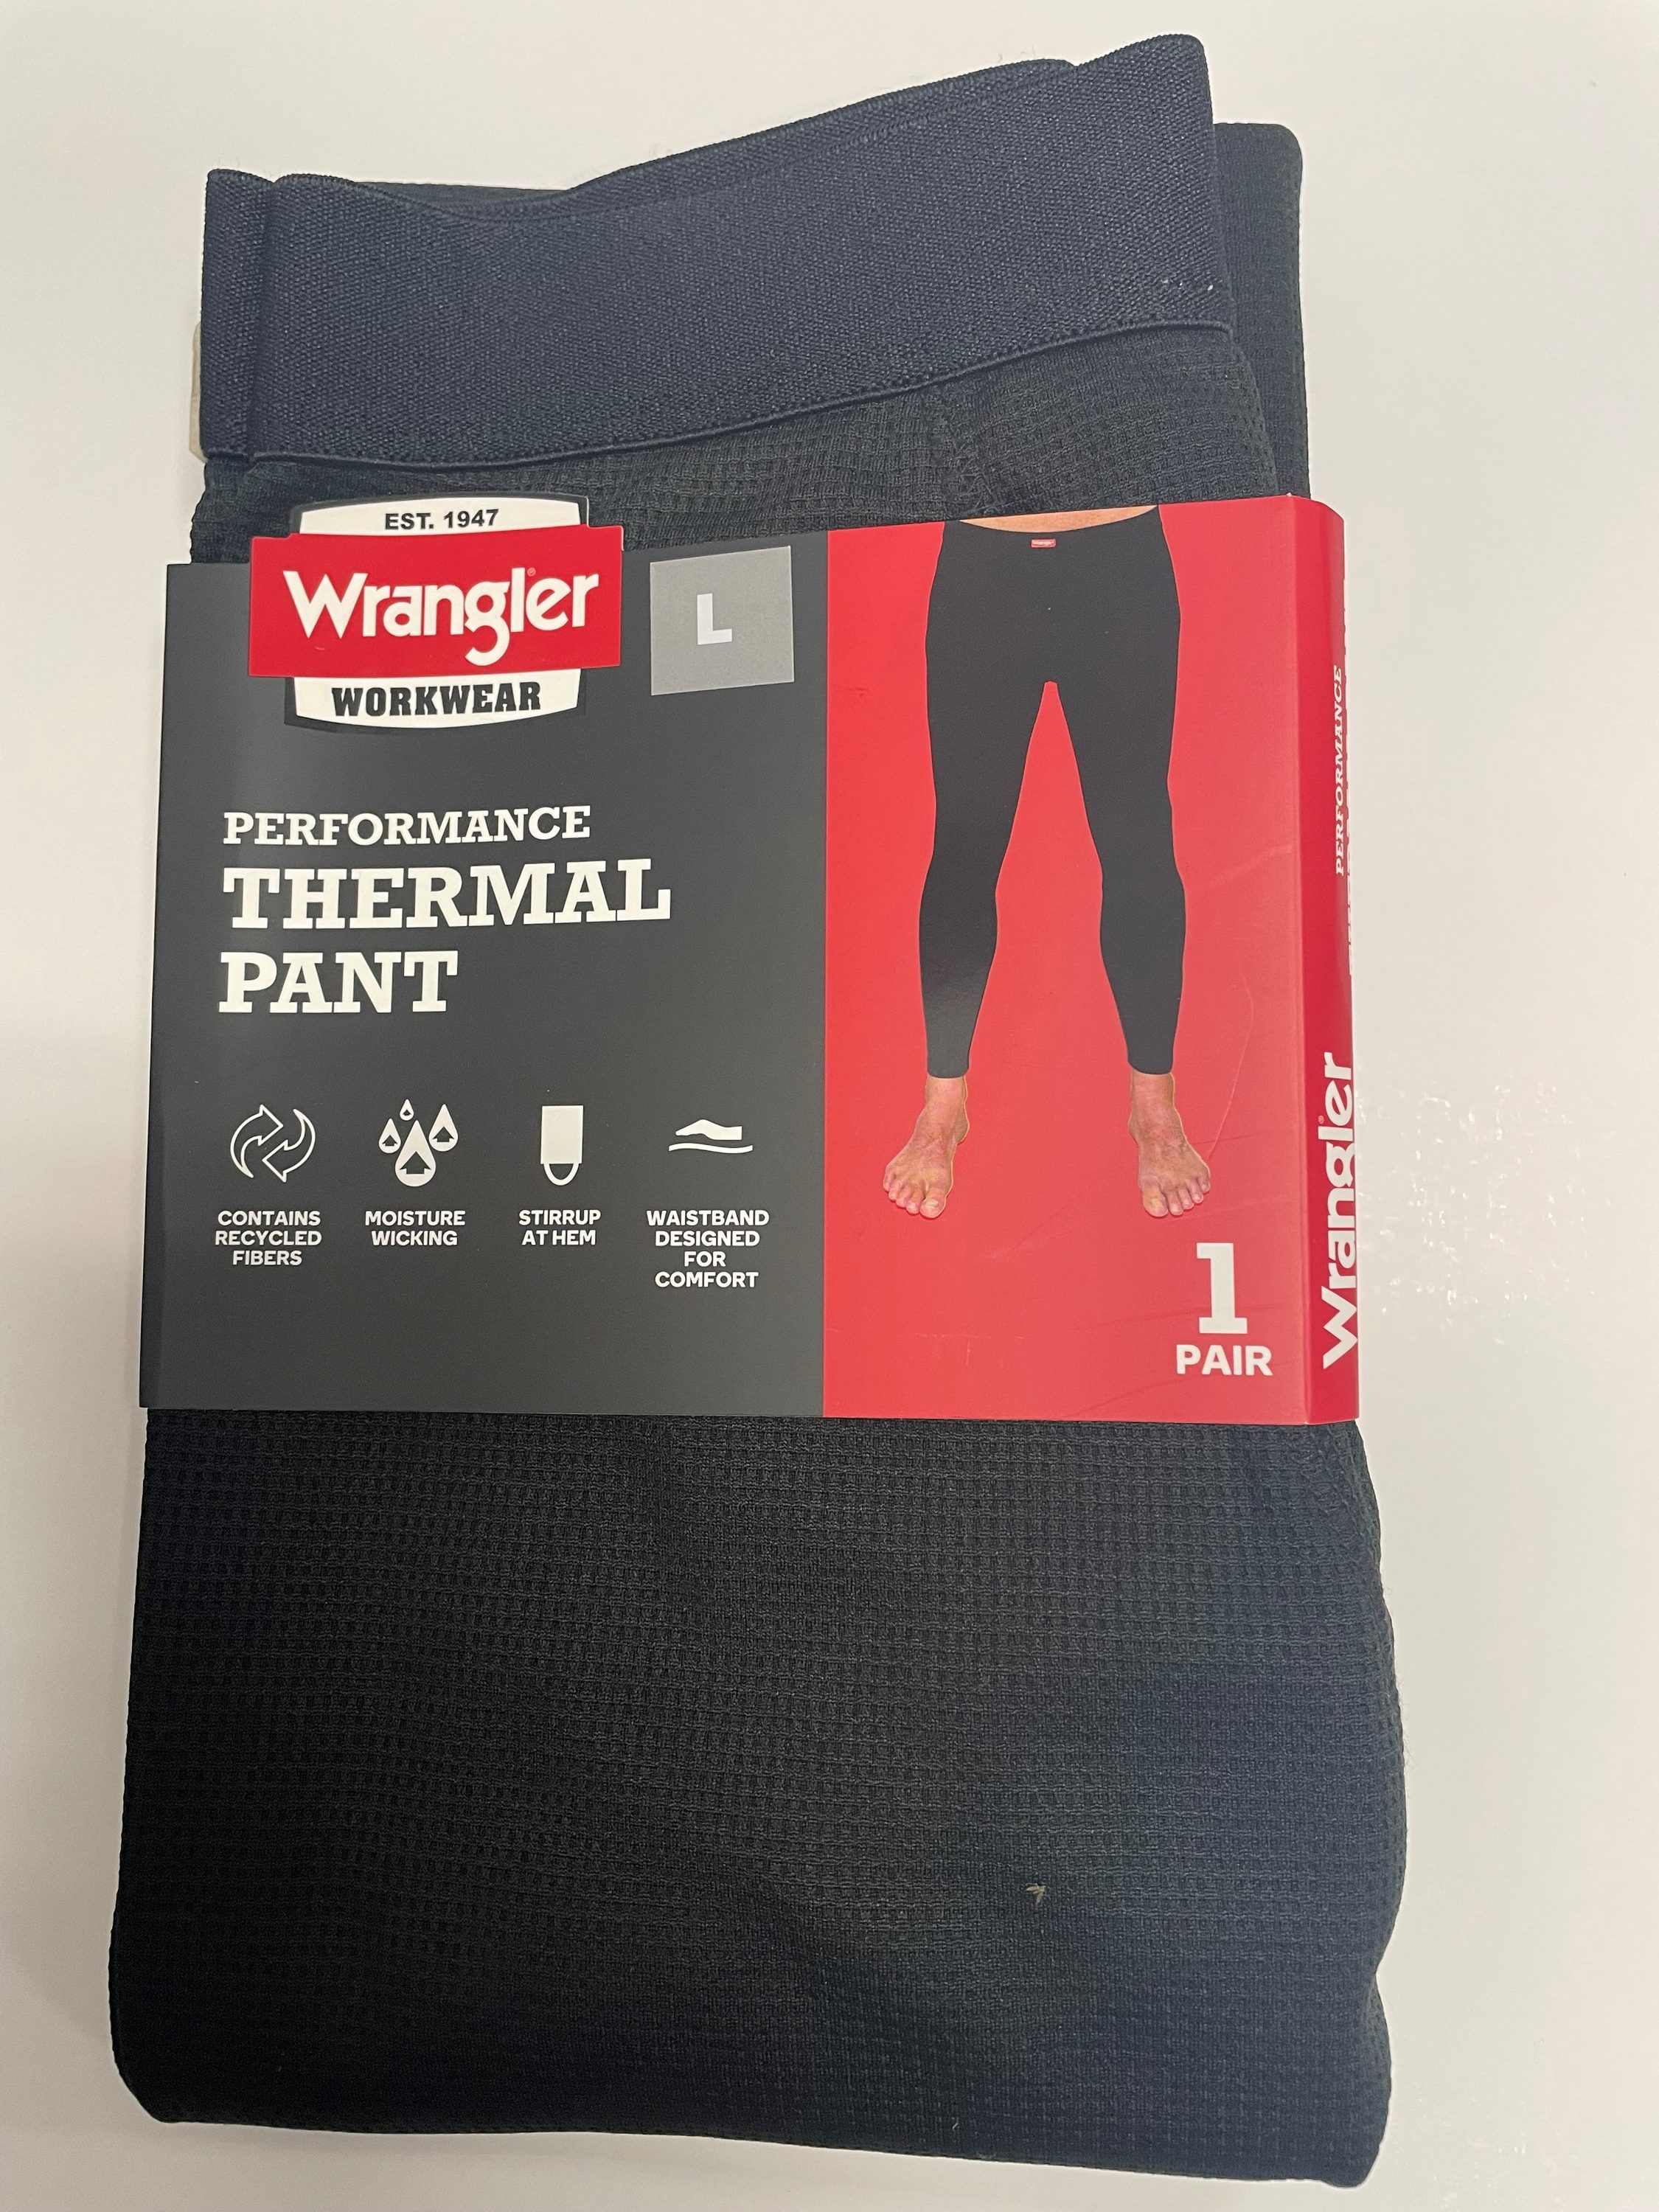 Wrangler Black Cotton/Polyester Thermal Pants (Medium) in the